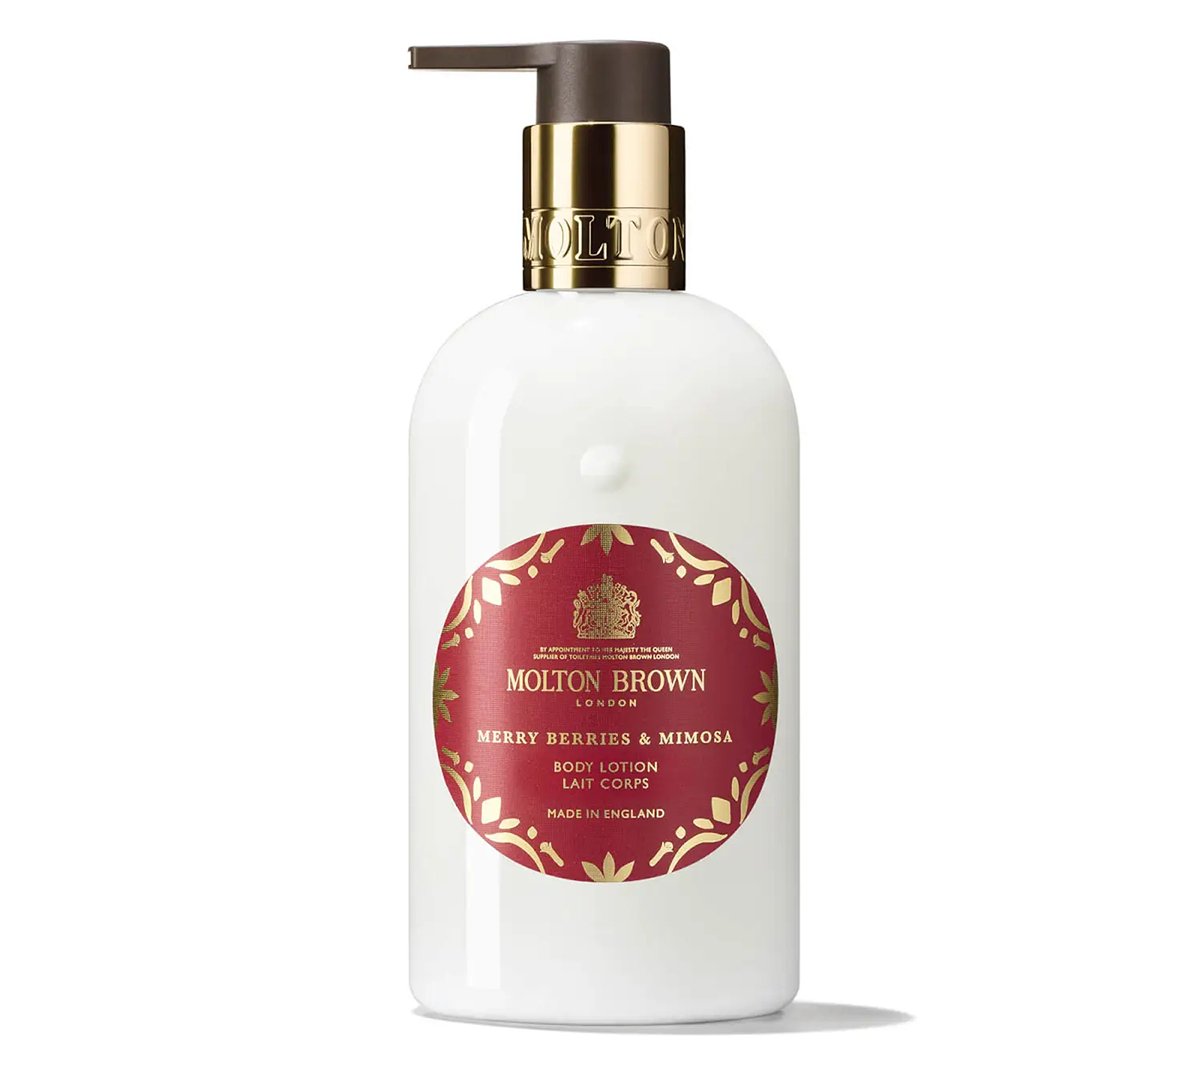 Molton Brown Merry Berries and Mimosa Body Lotion